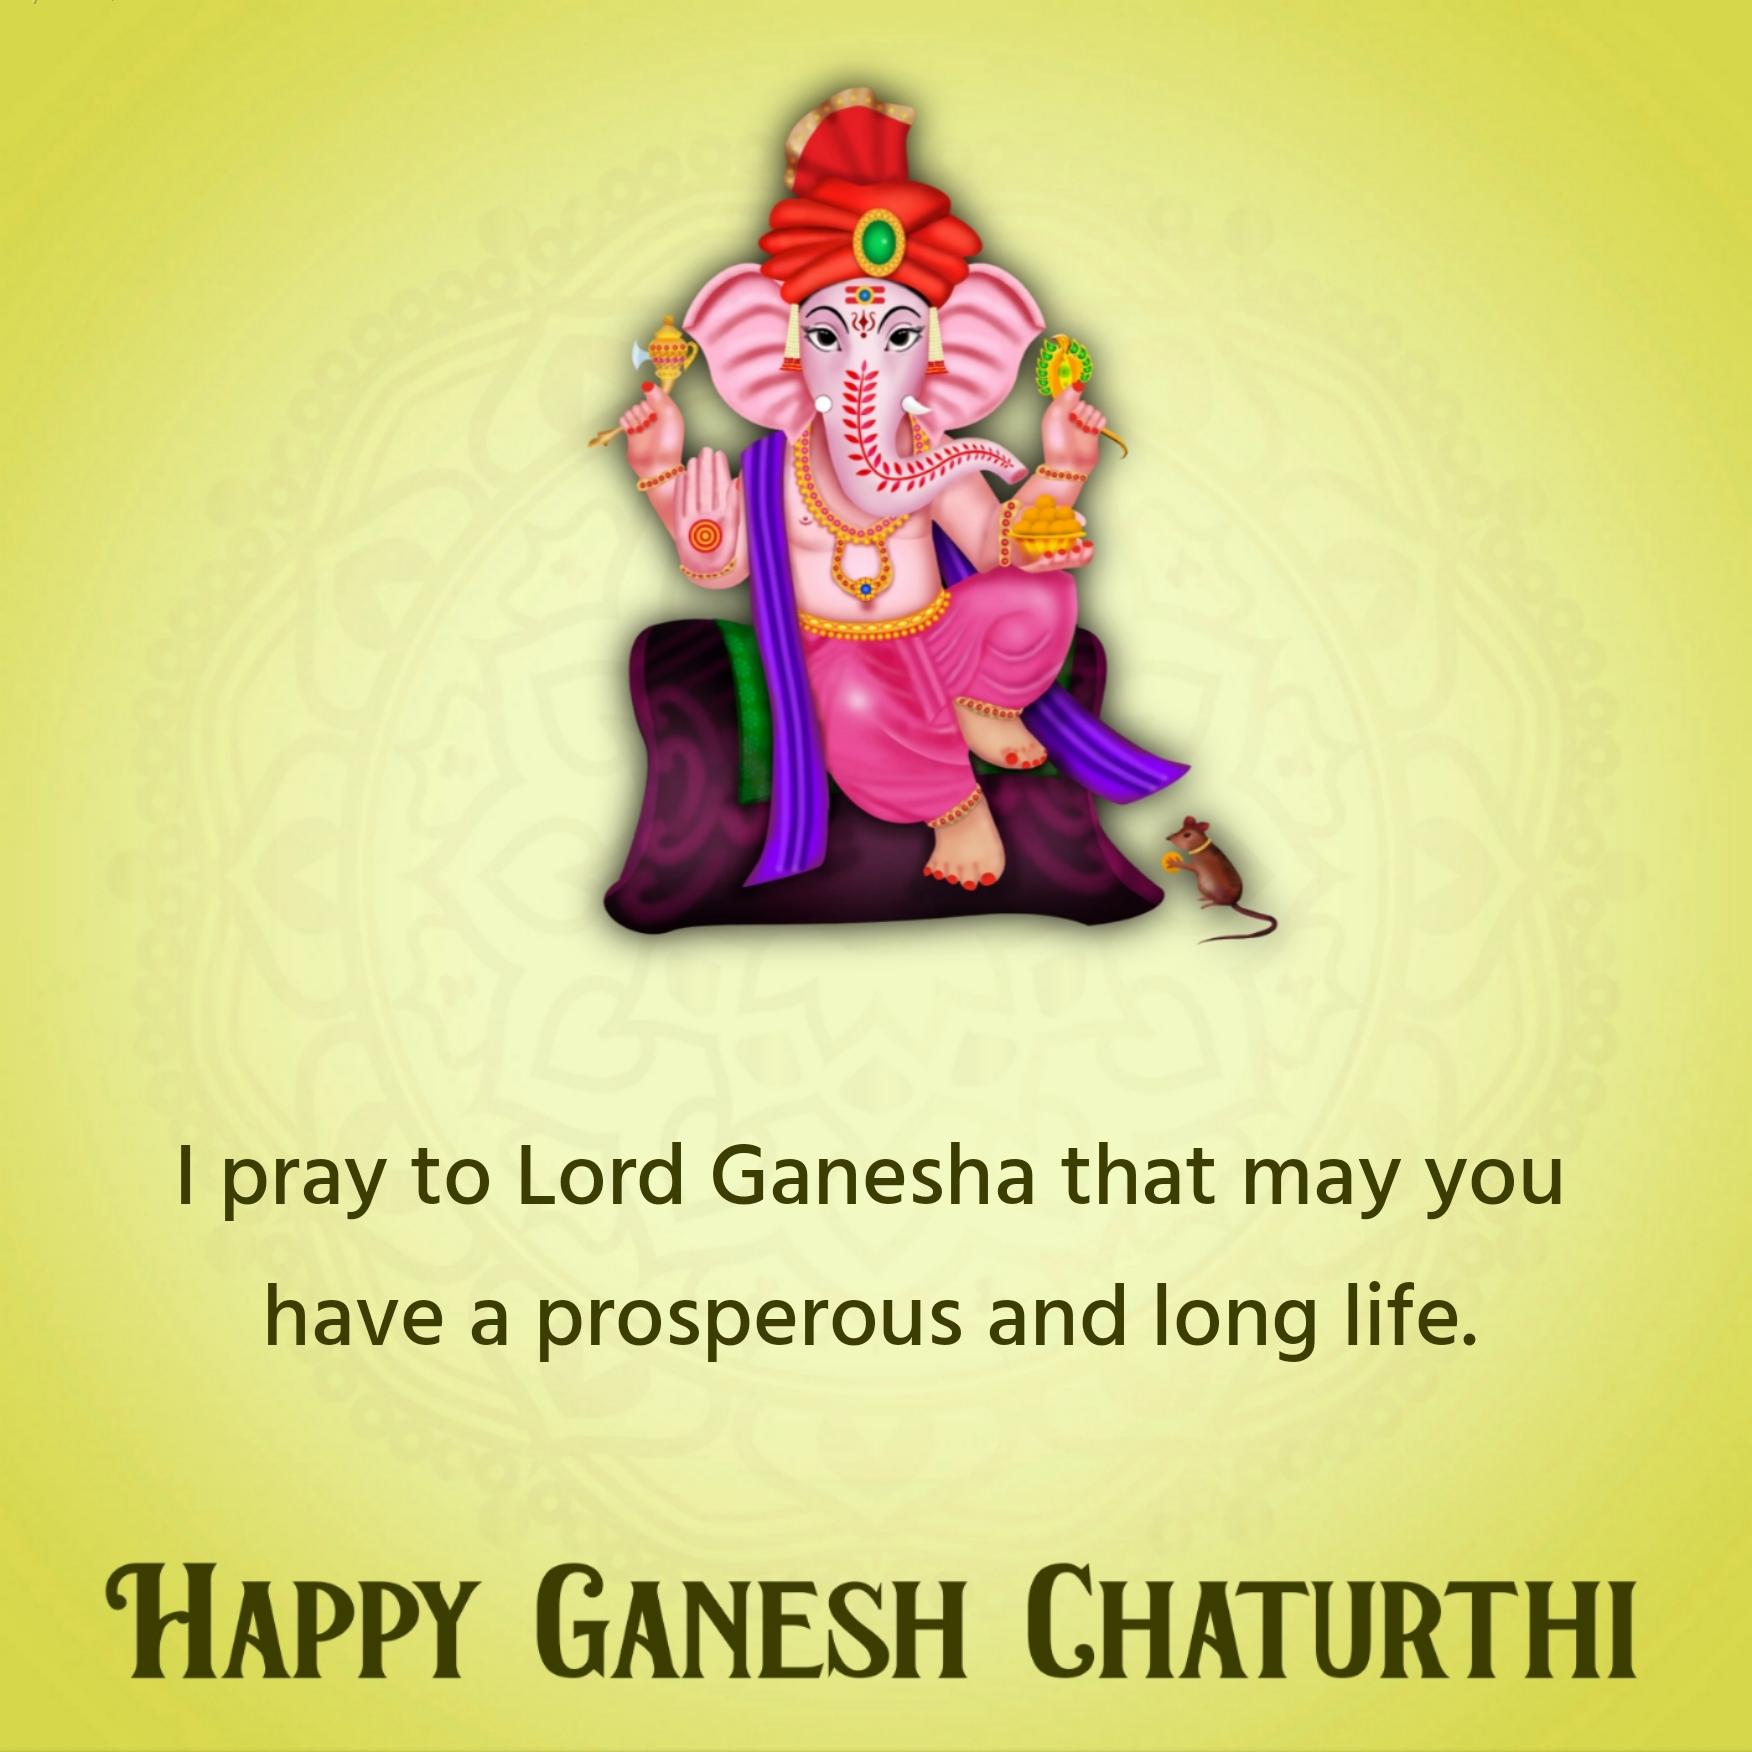 I pray to Lord Ganesha that may you have a prosperous